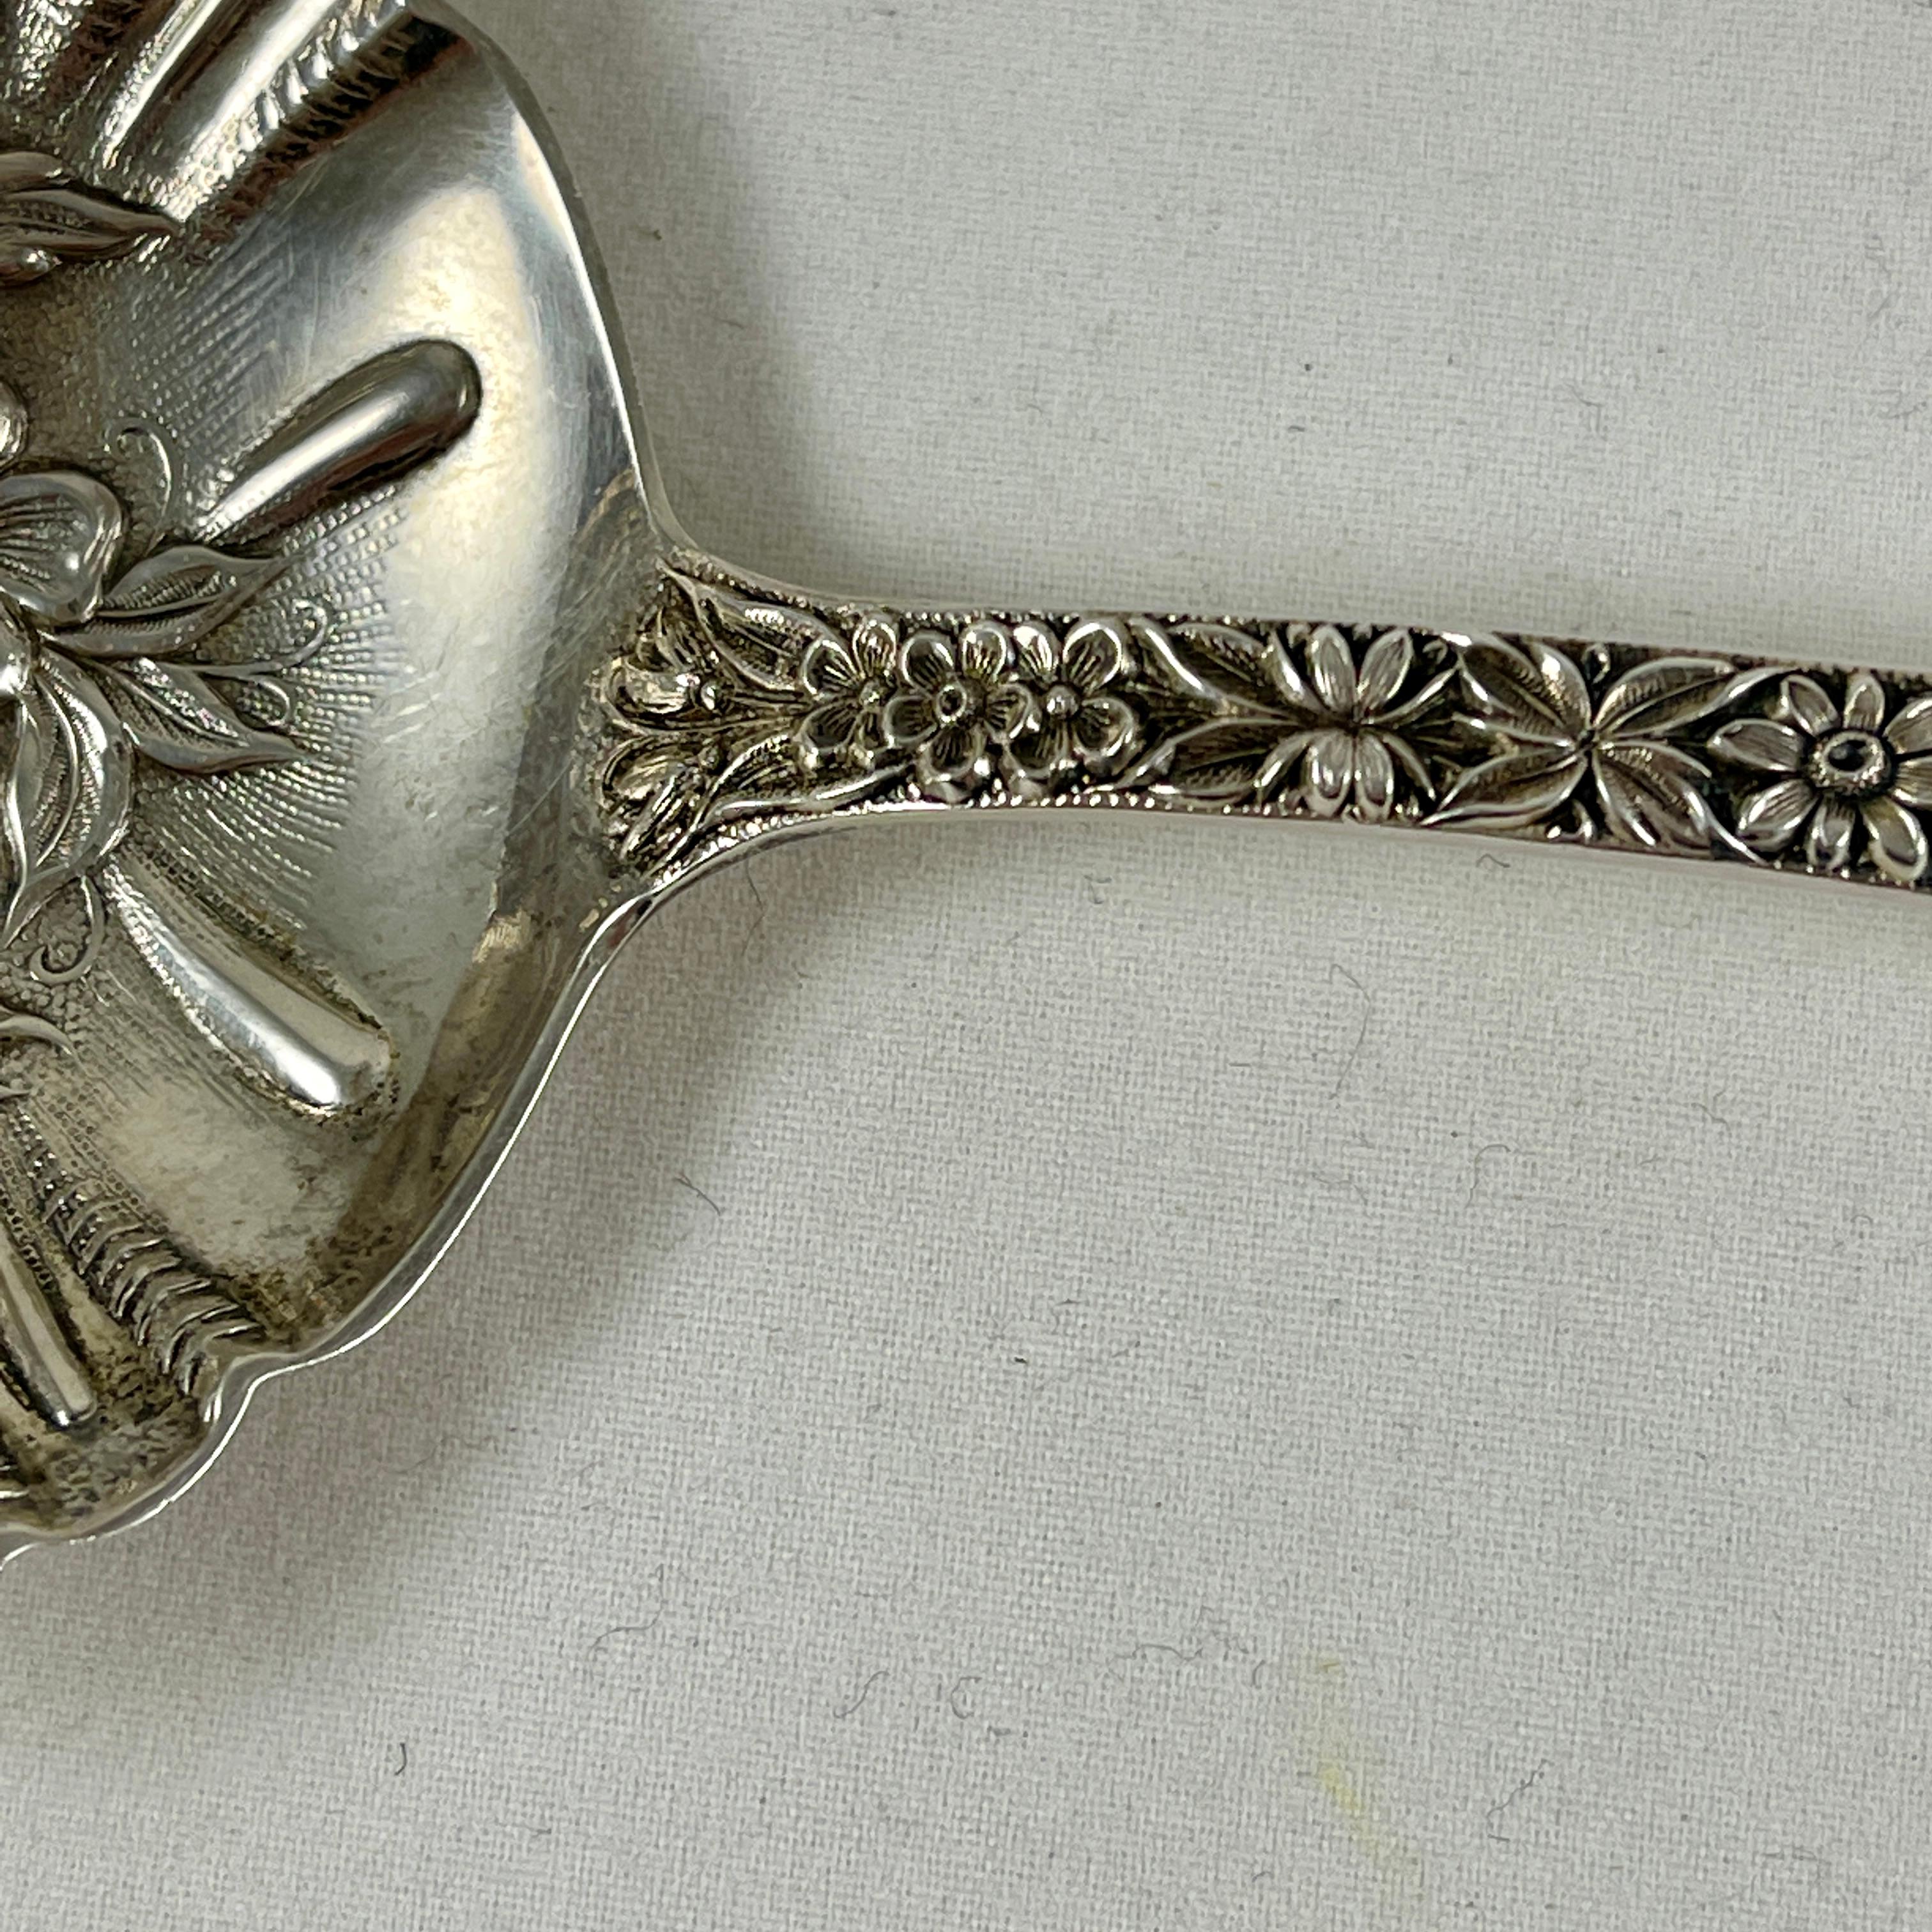 Details about   S KIRK & SON ROSE STERLING SILVER SERVING SPOON GOOD CONDITION 